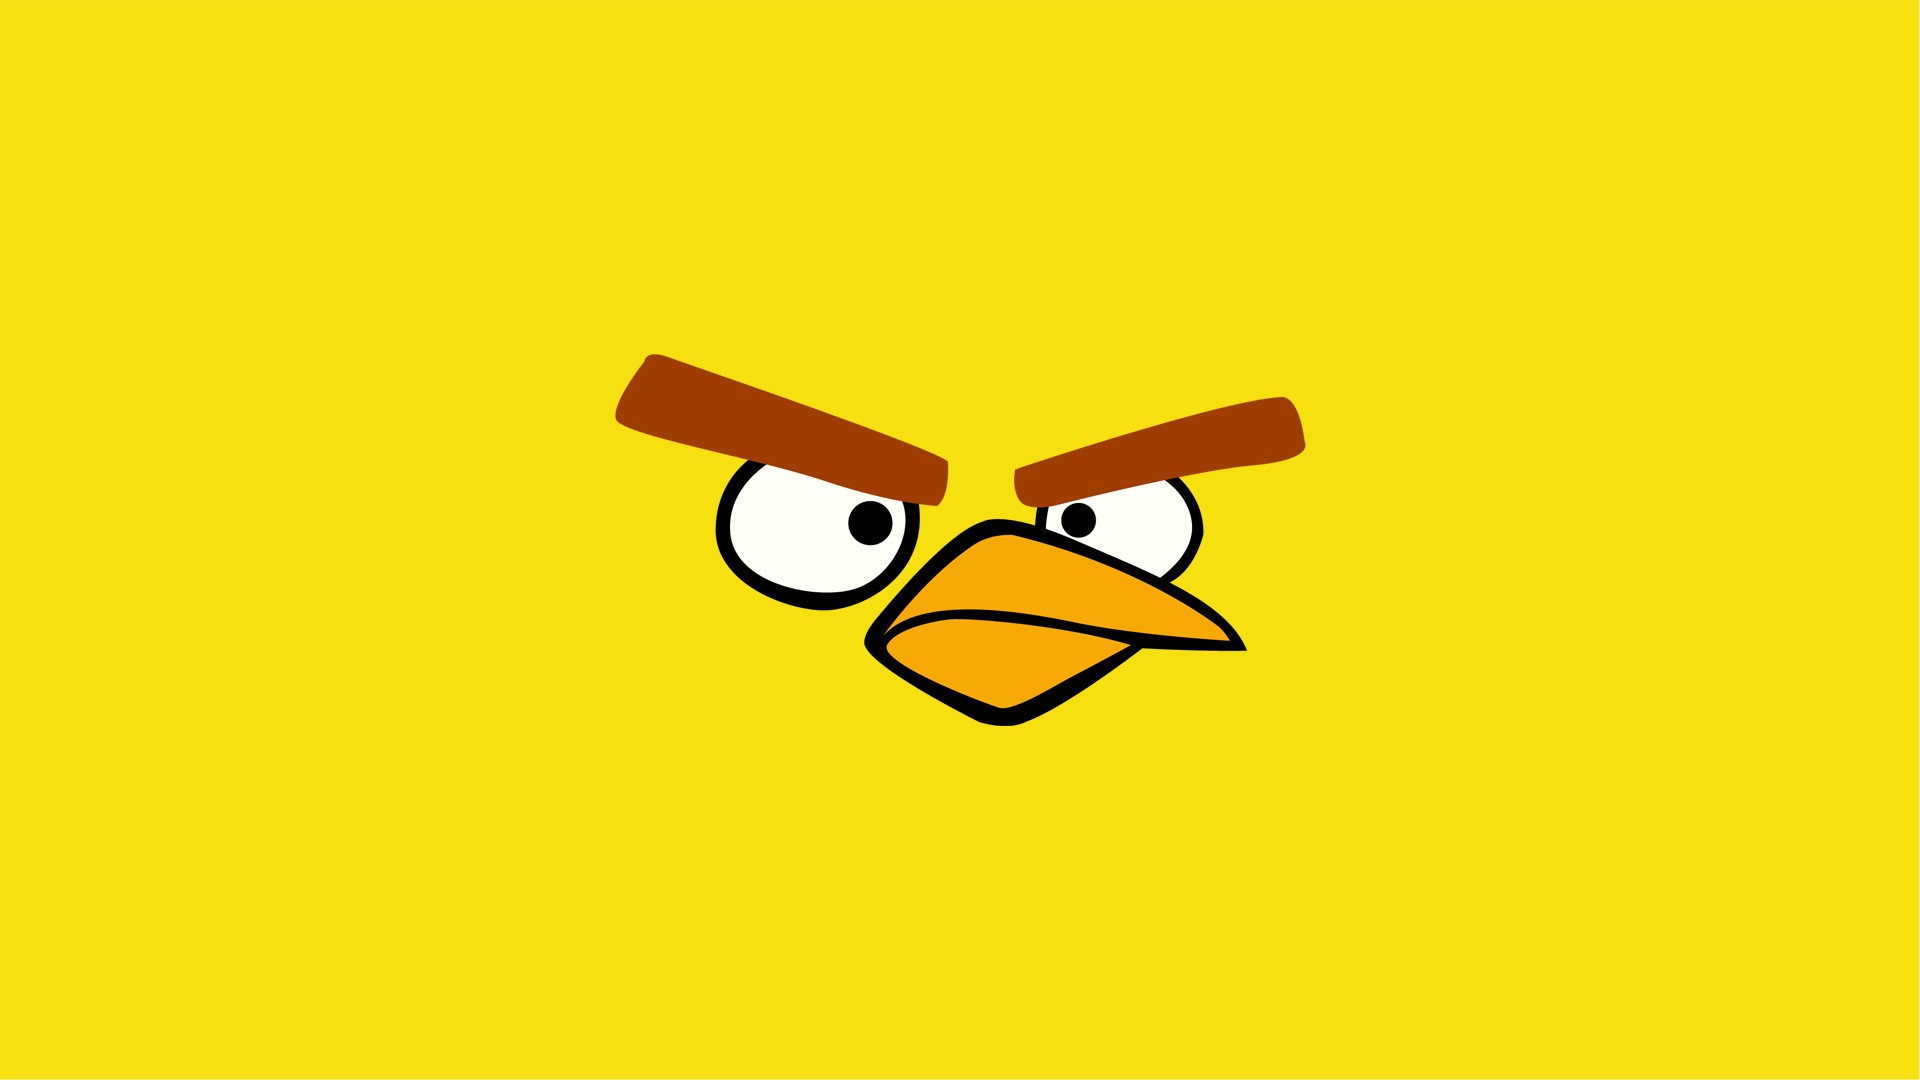 20 Best HD Angry Birds Wallpapers   DezineGuide